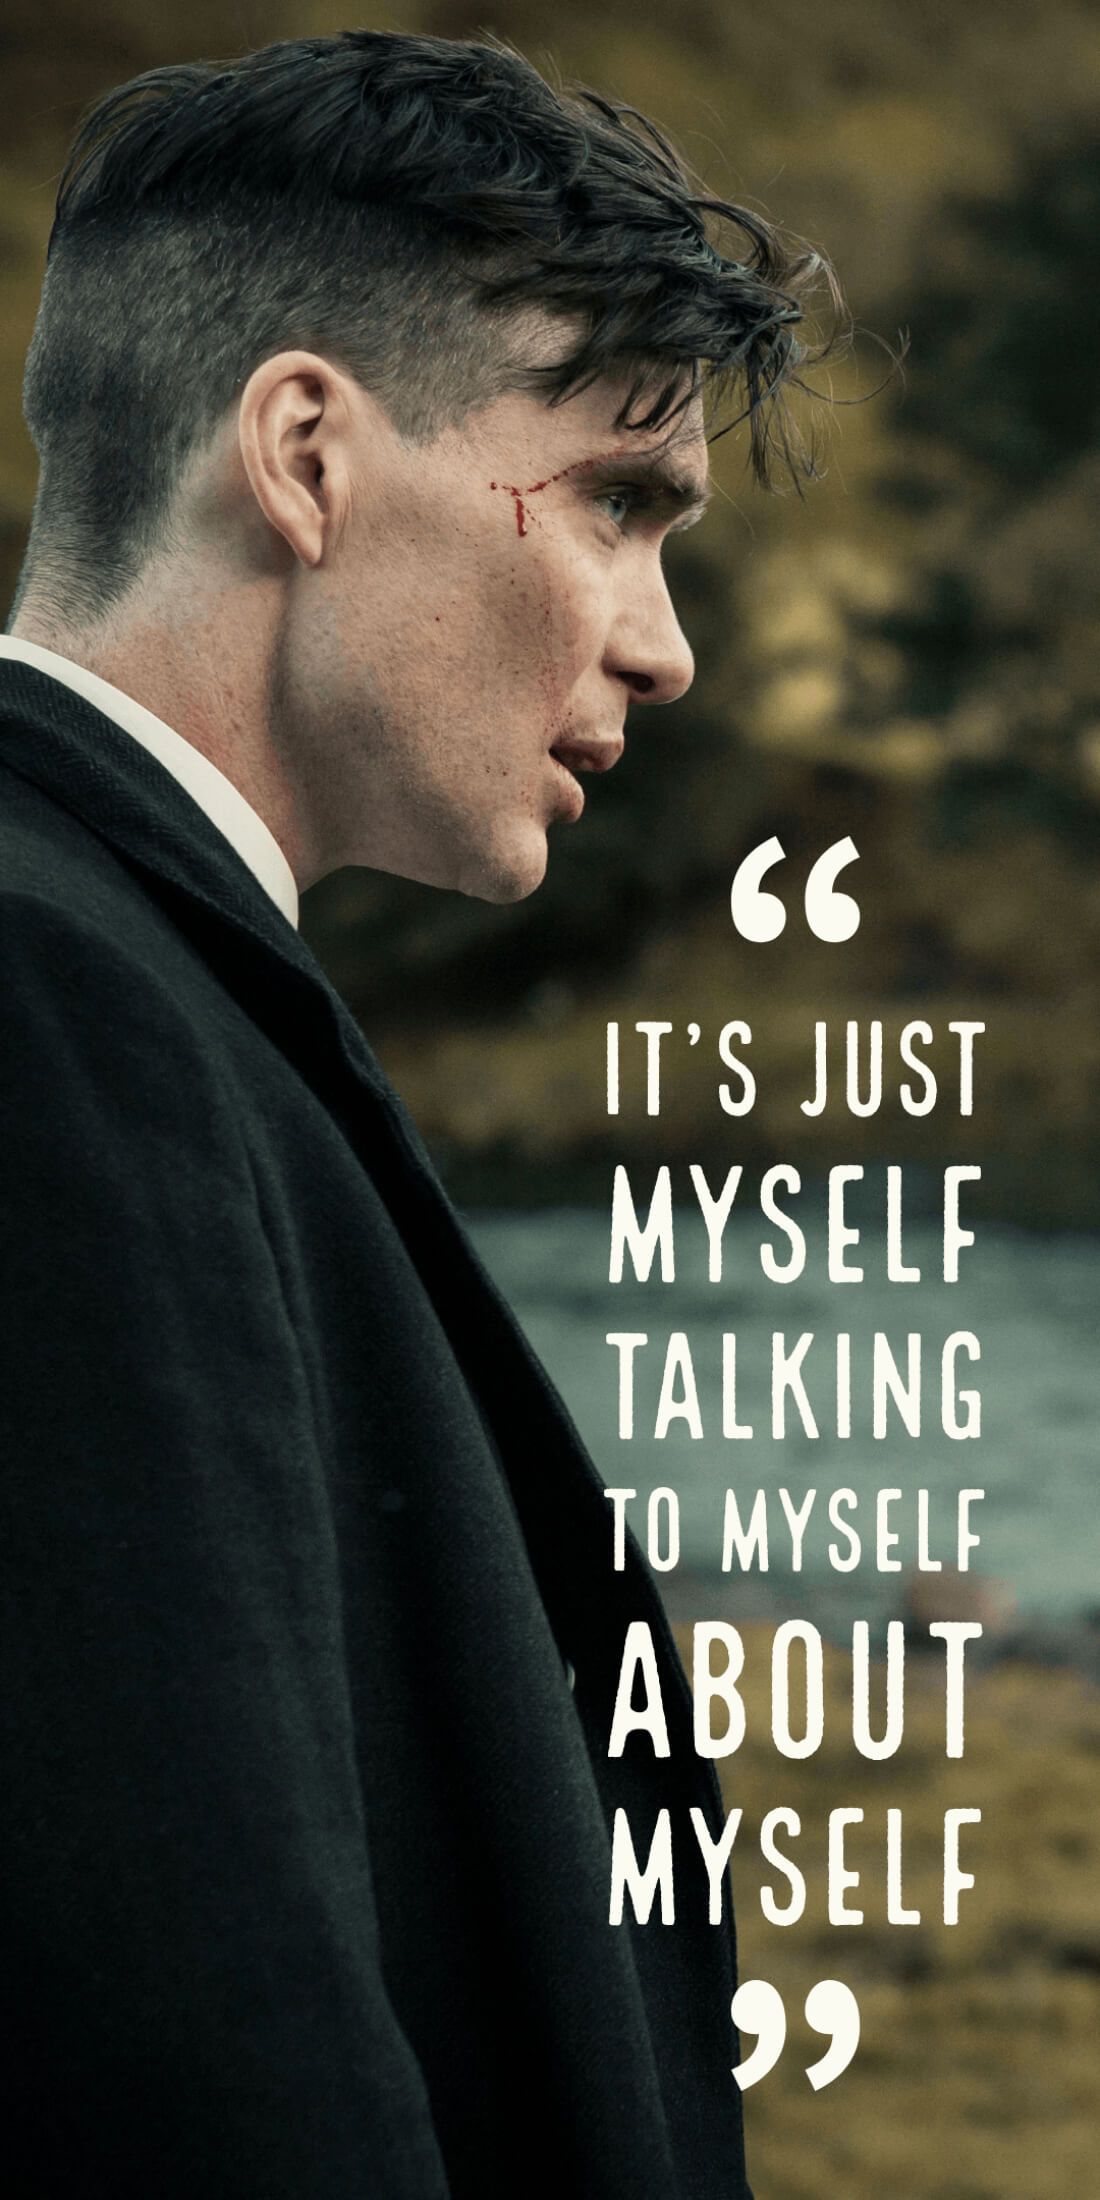 Thomas Shelby Quotes Wallpapers